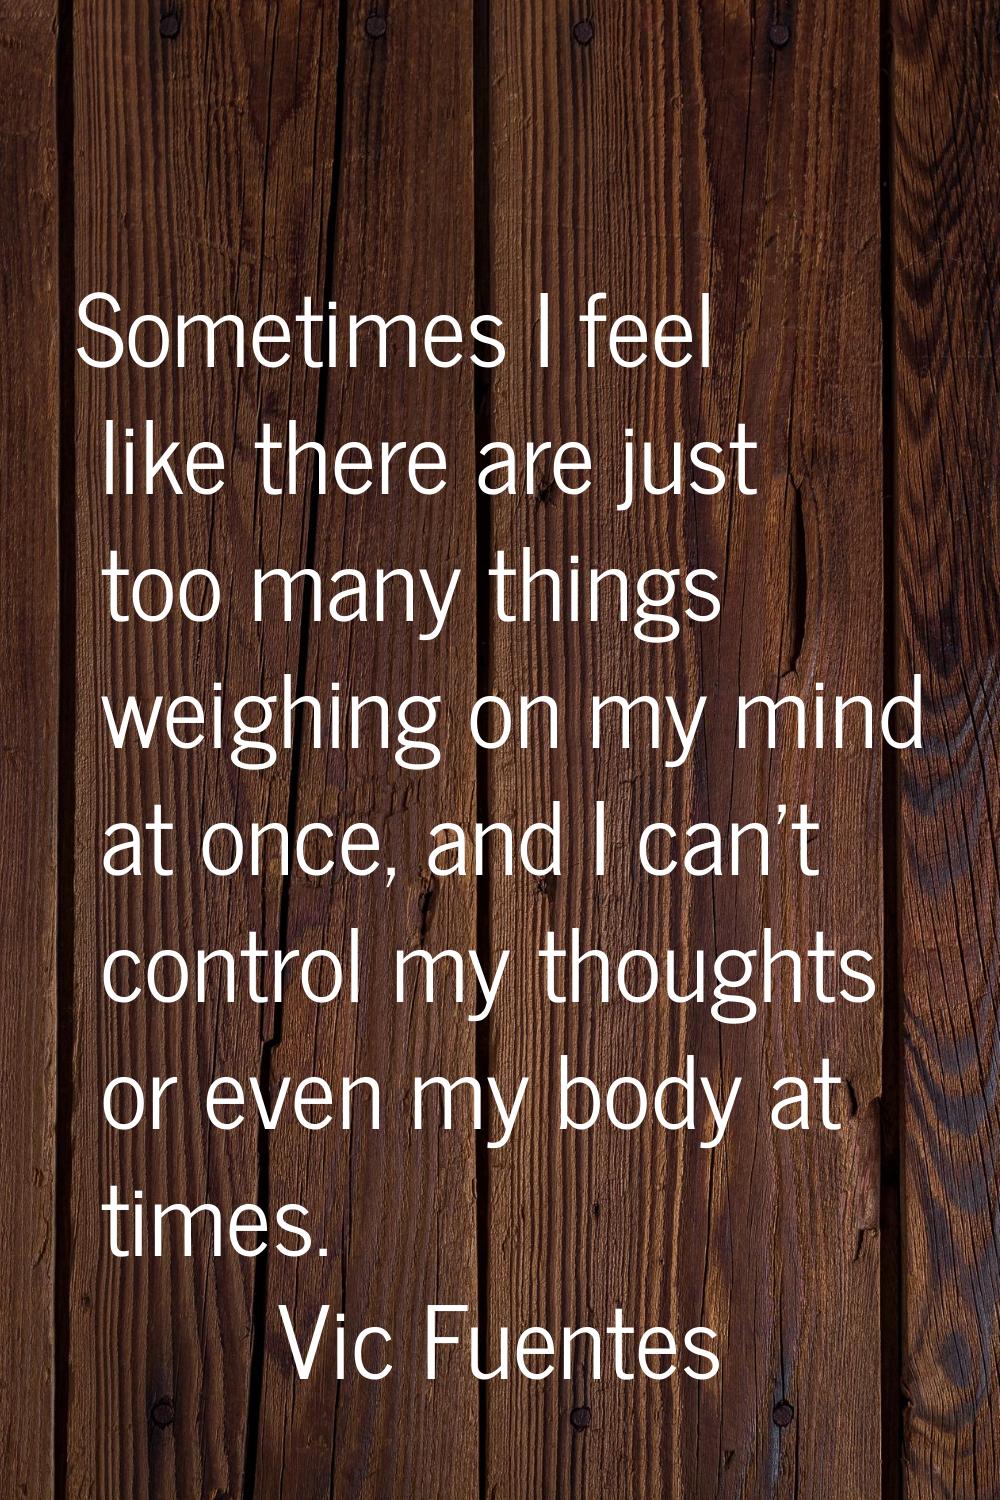 Sometimes I feel like there are just too many things weighing on my mind at once, and I can't contr